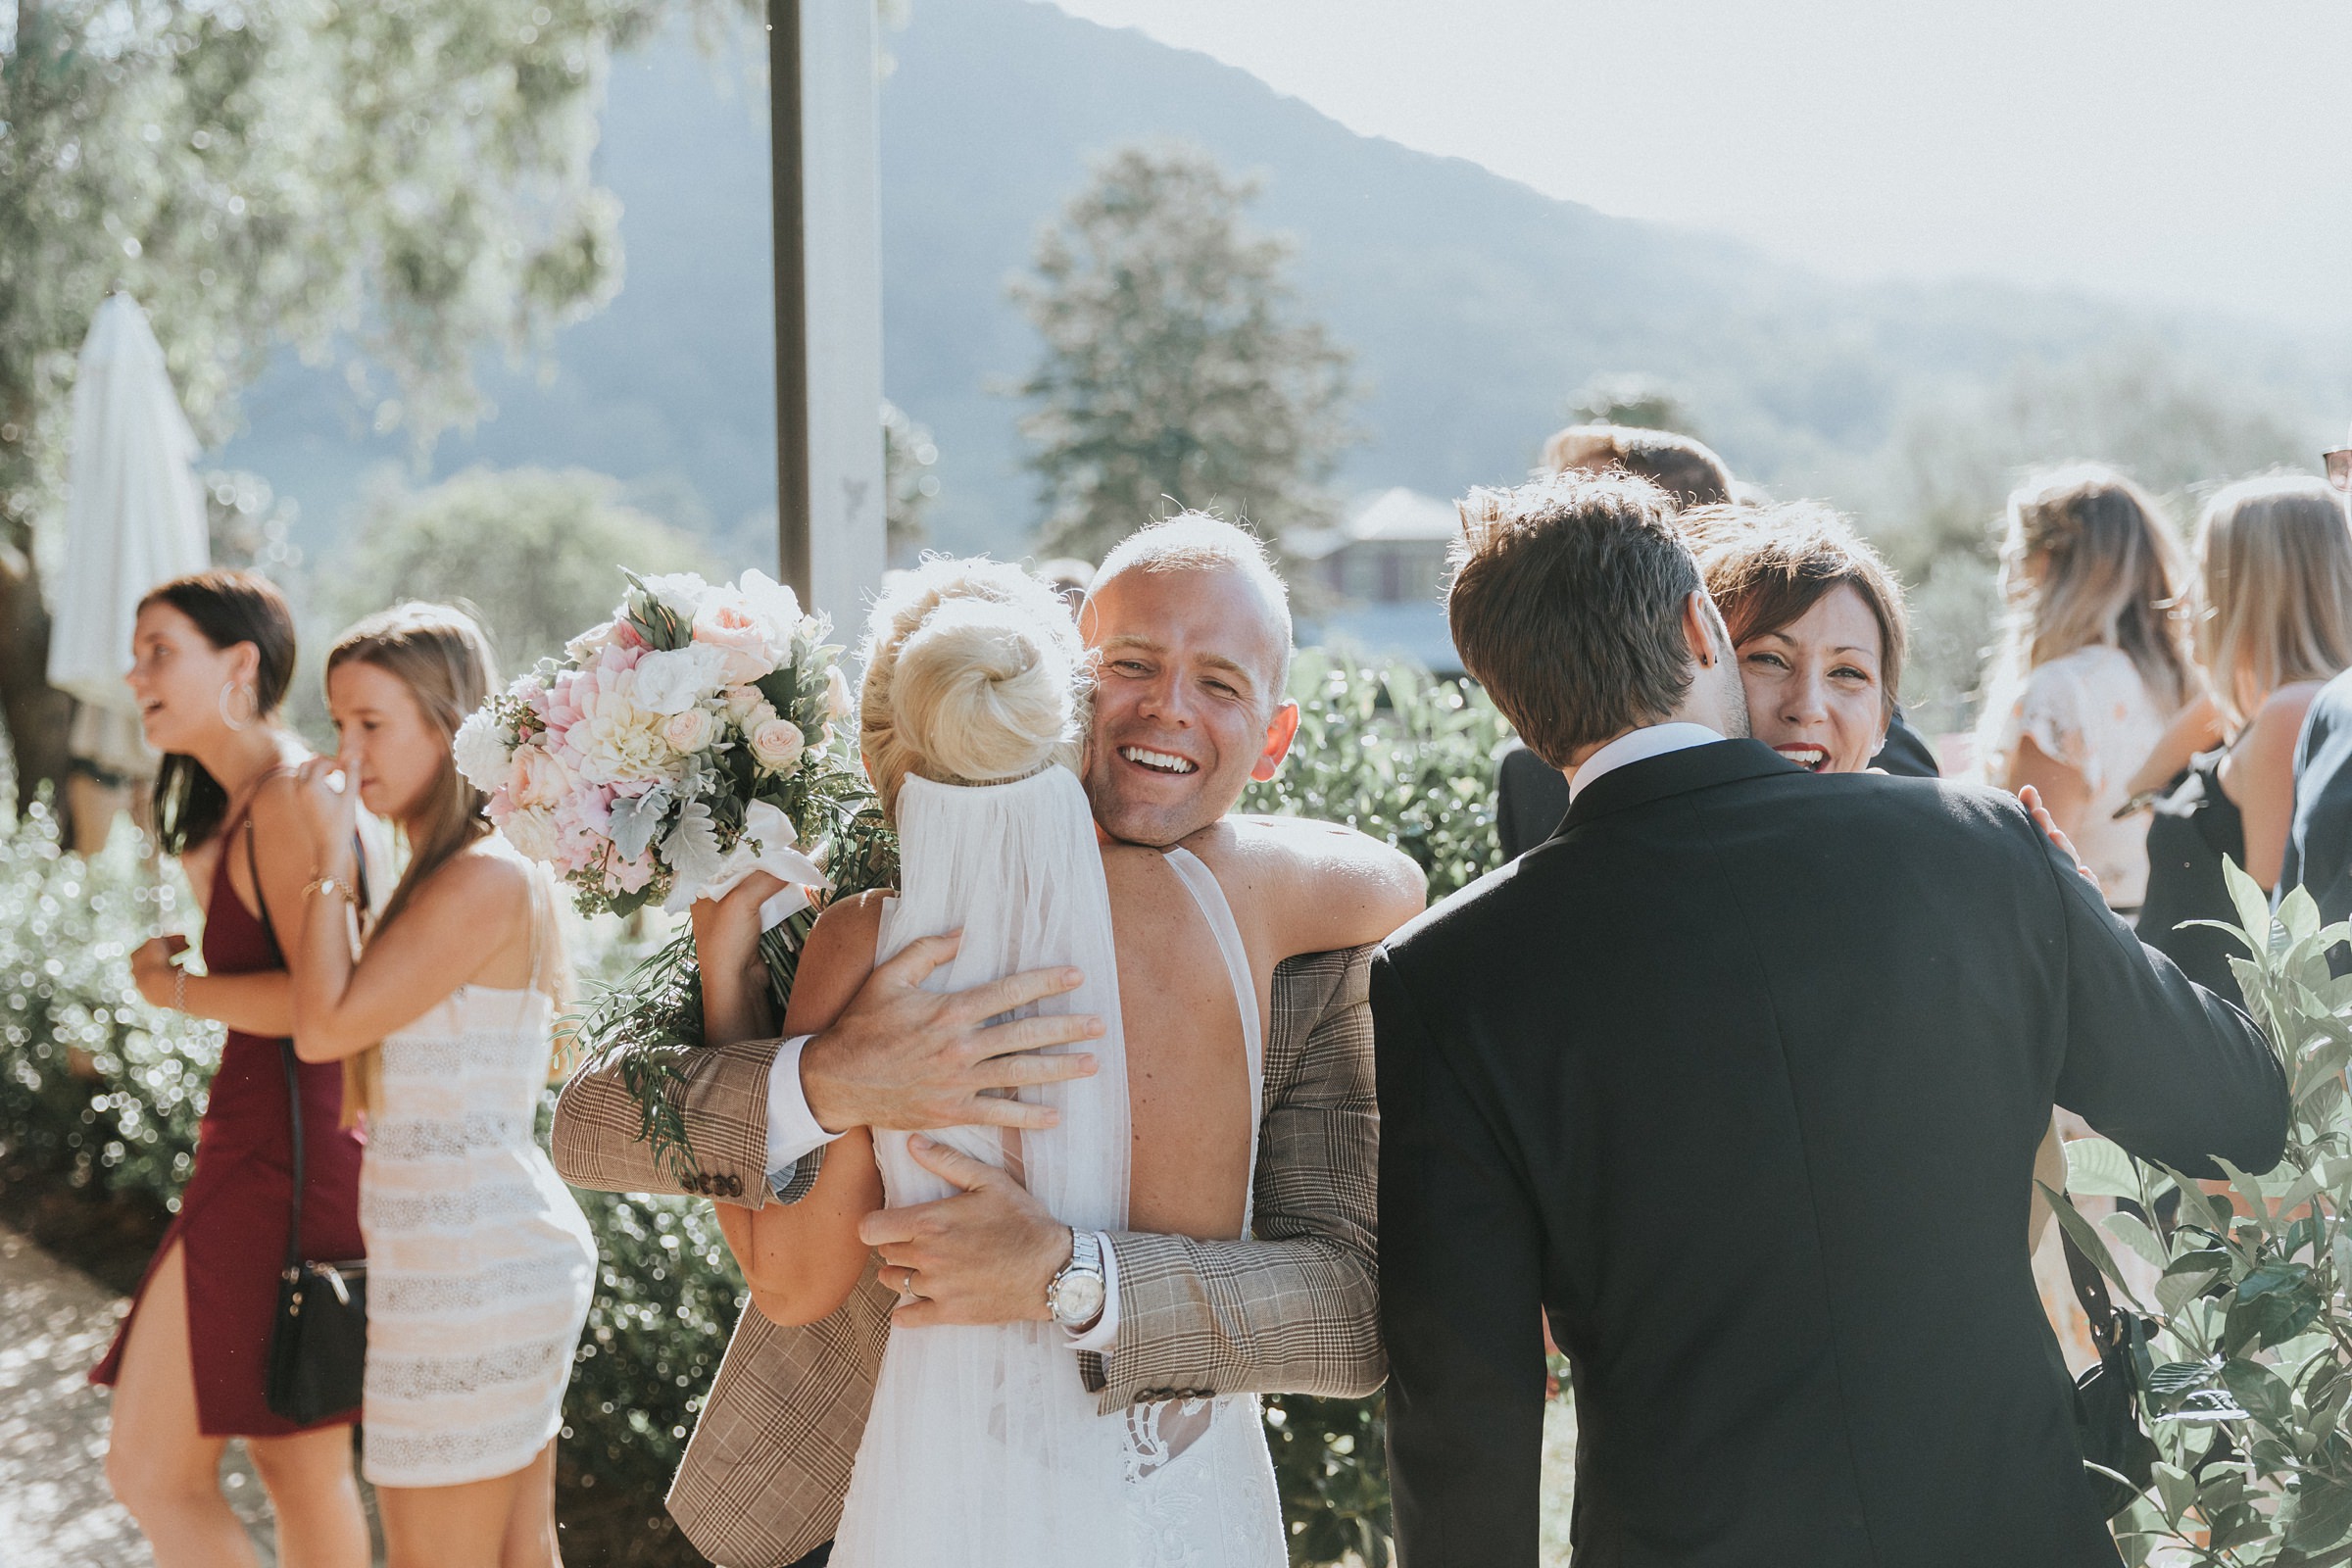 candid photos of guests congratulating the bride and groom